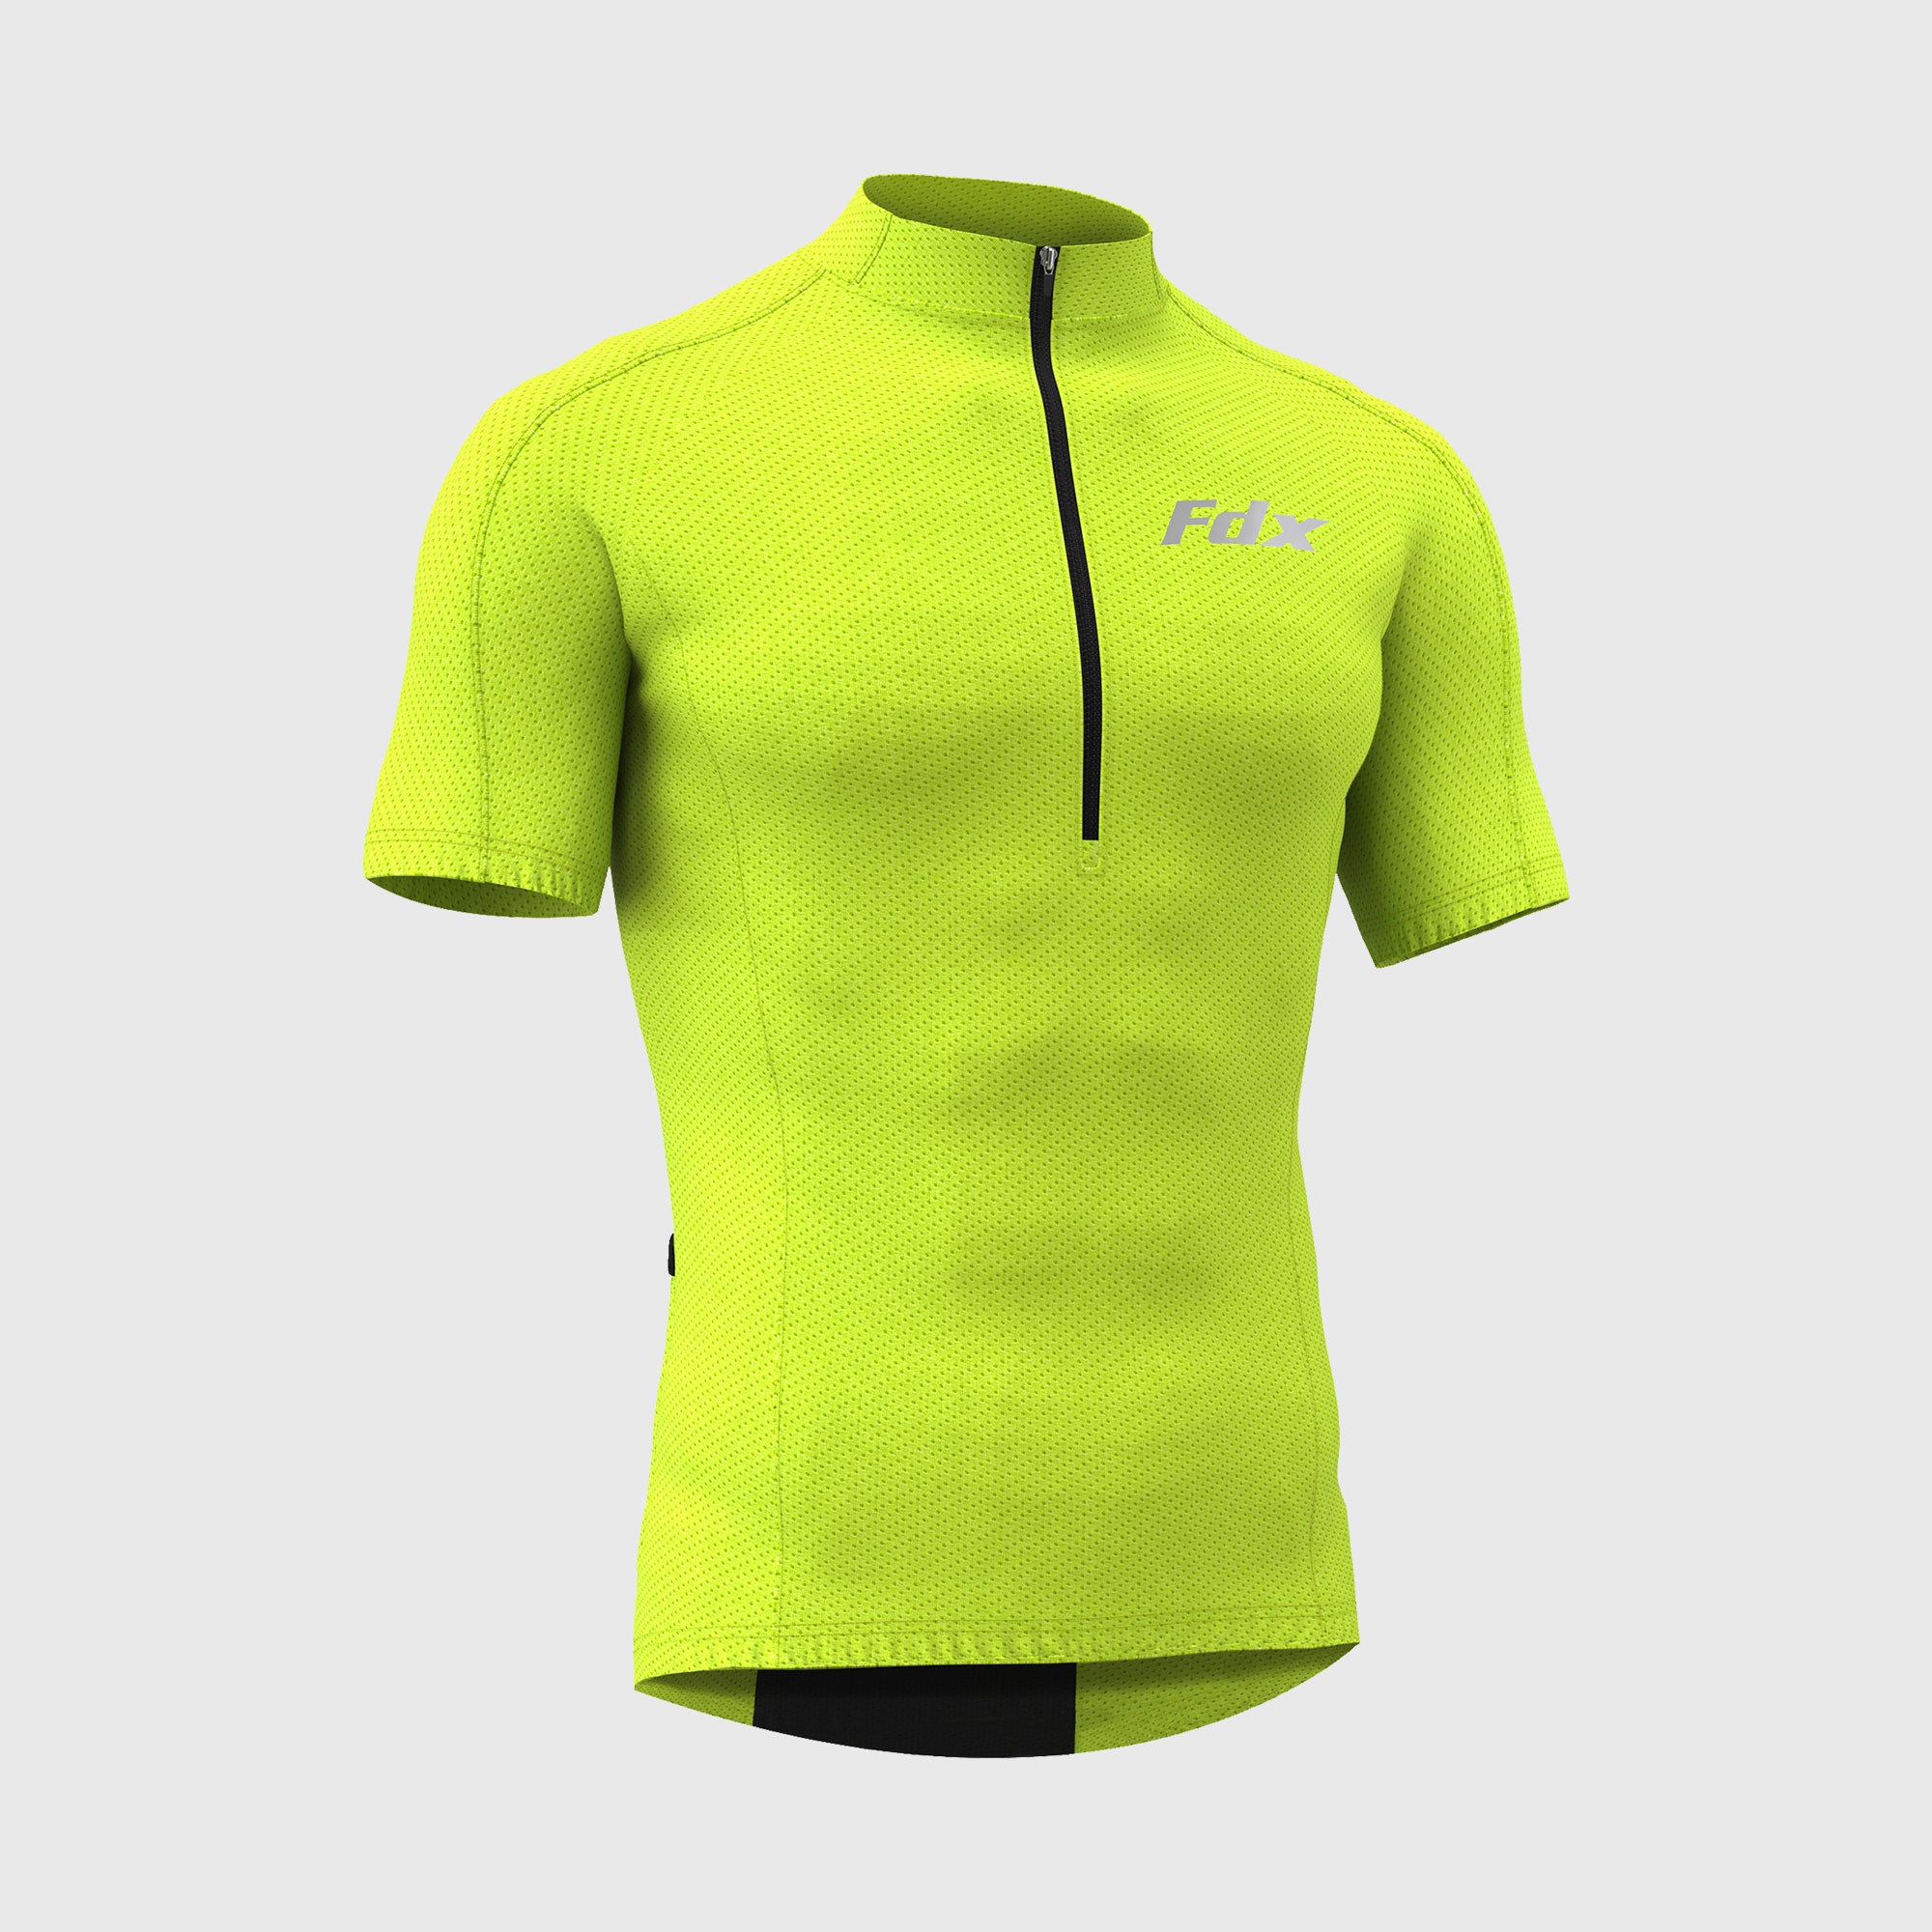  Fdx Yellow best short sleeves men’s cycling jersey breathable lightweight hi-viz Reflective details summer biking top, full zip skin friendly half sleeves mesh cycling shirt for indoor & outdoor riding with two back & 1 zip pockets